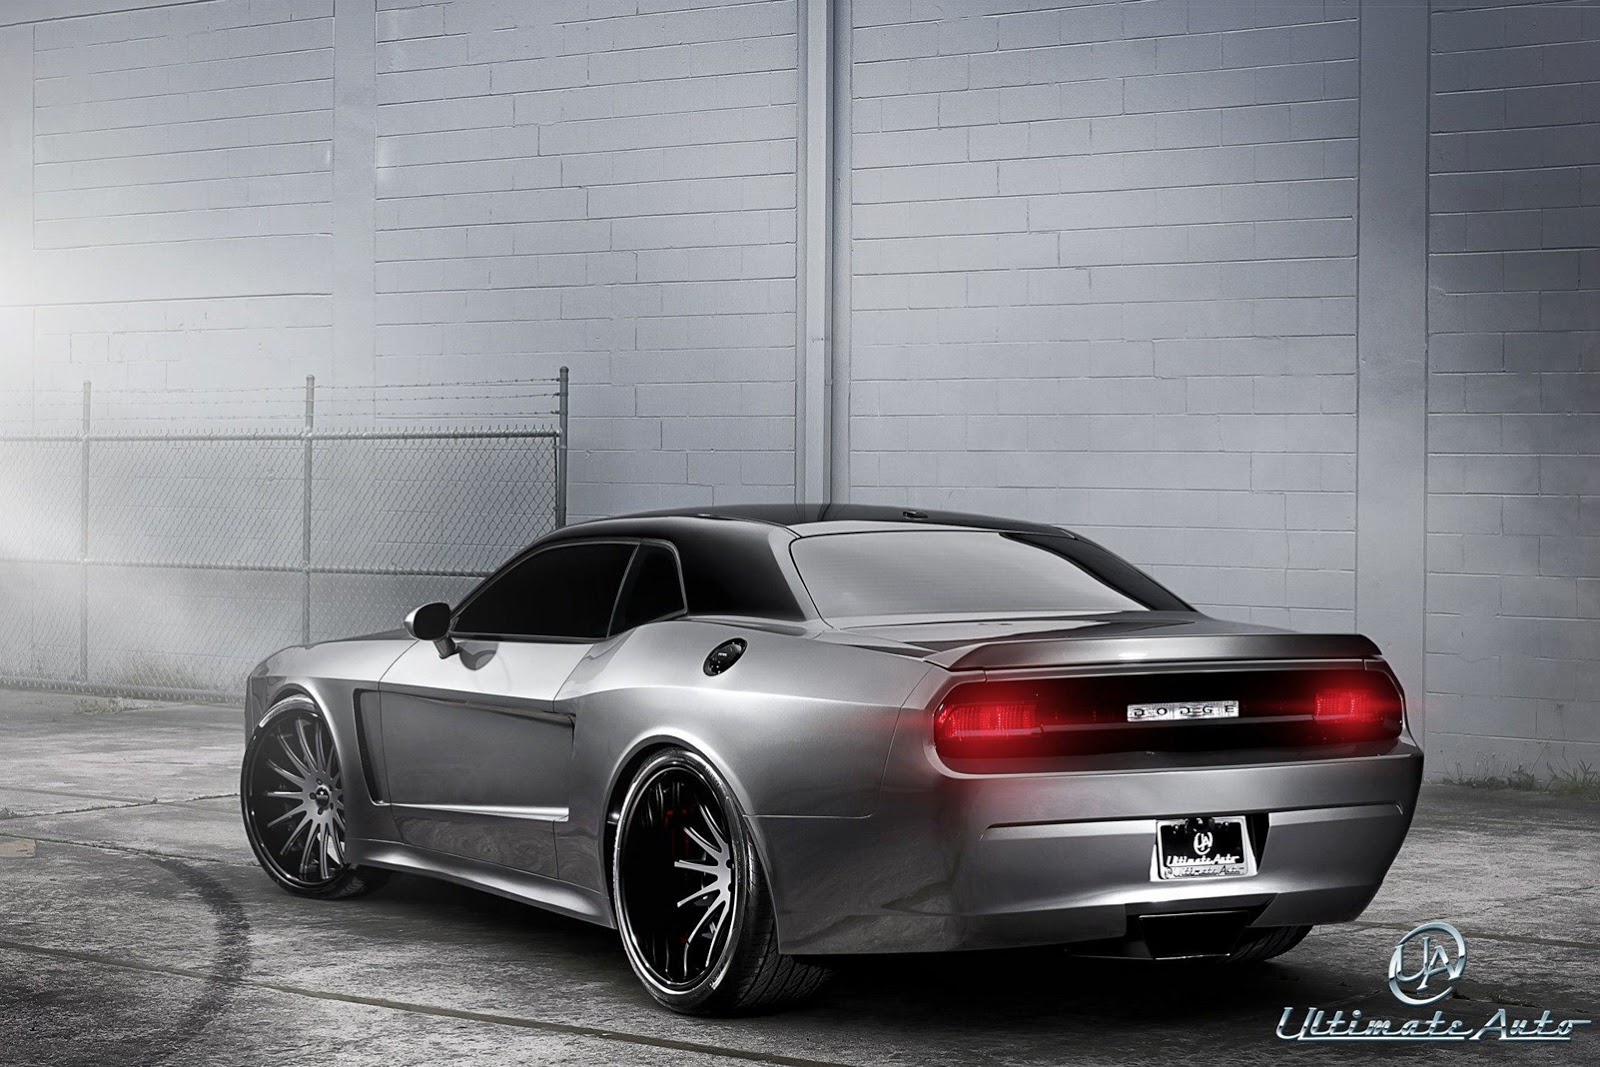 Dodge Challenger SRT-8 Widebody by Ultimate Auto